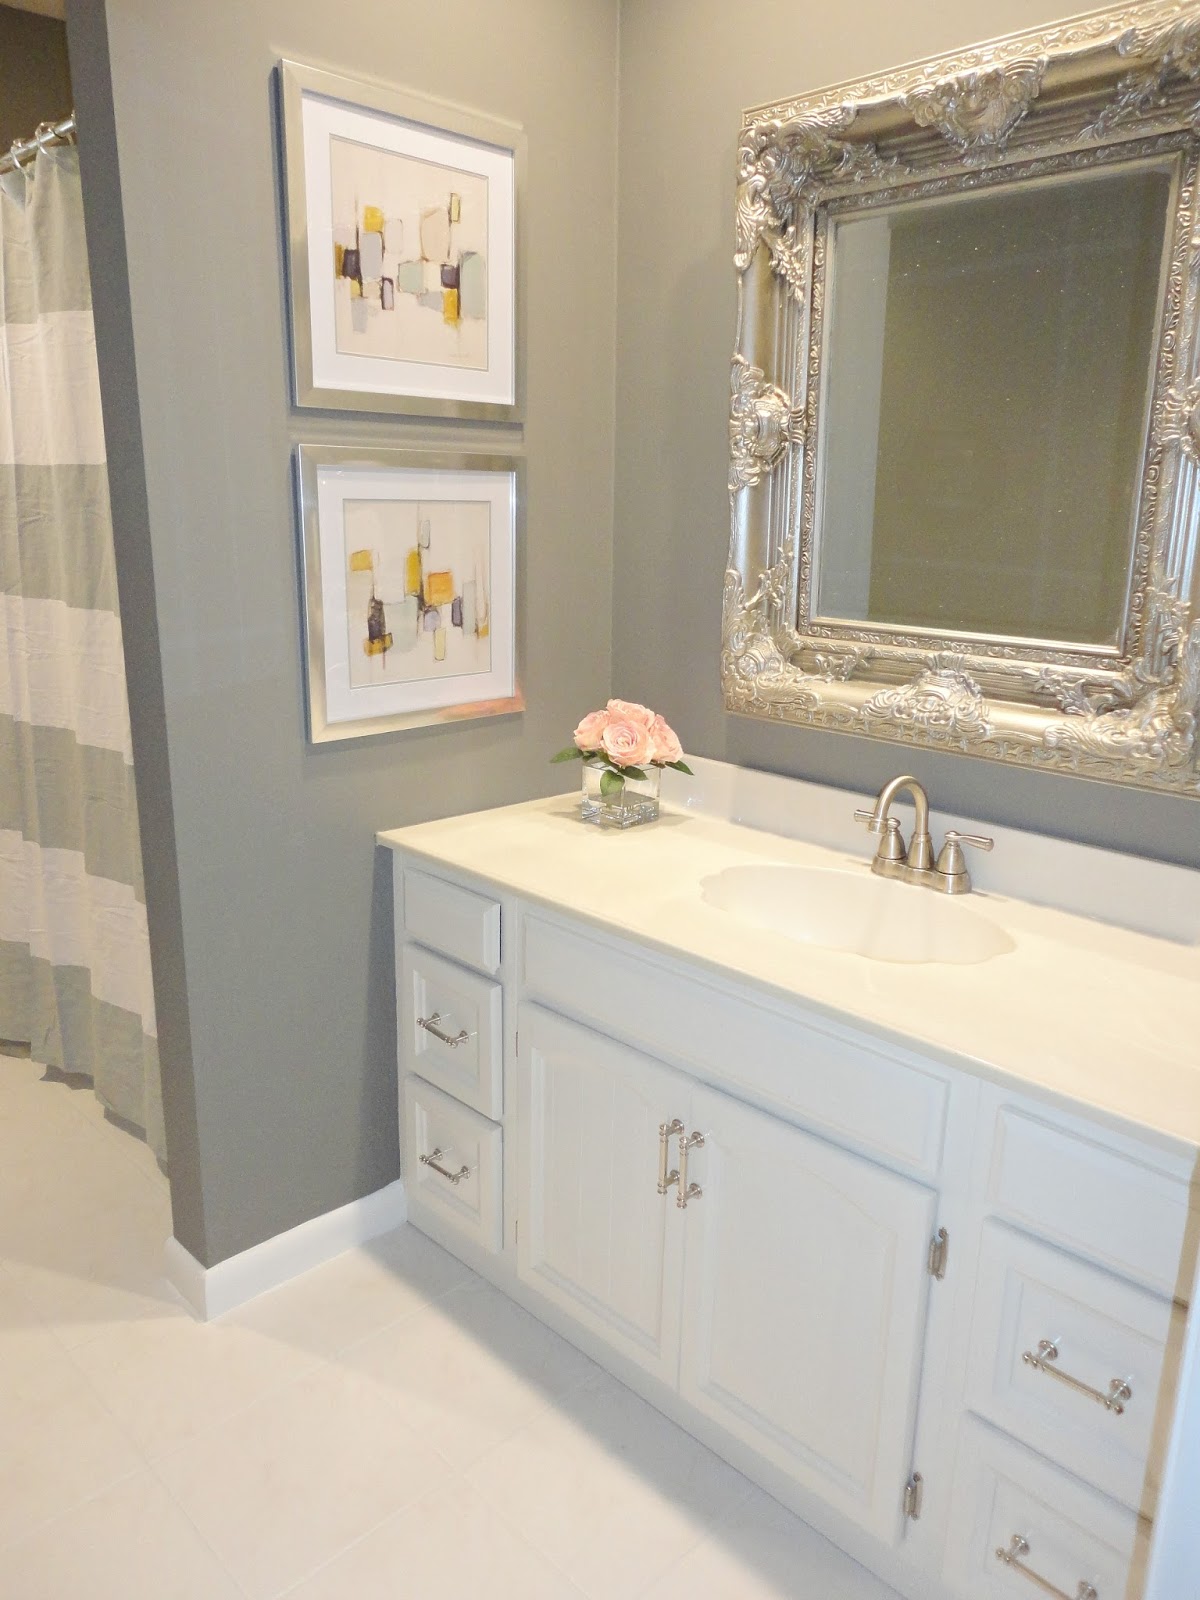 DIY Bathroom Renovations: Transform Your Space In A Weekend With These Simple And Affordable Tips